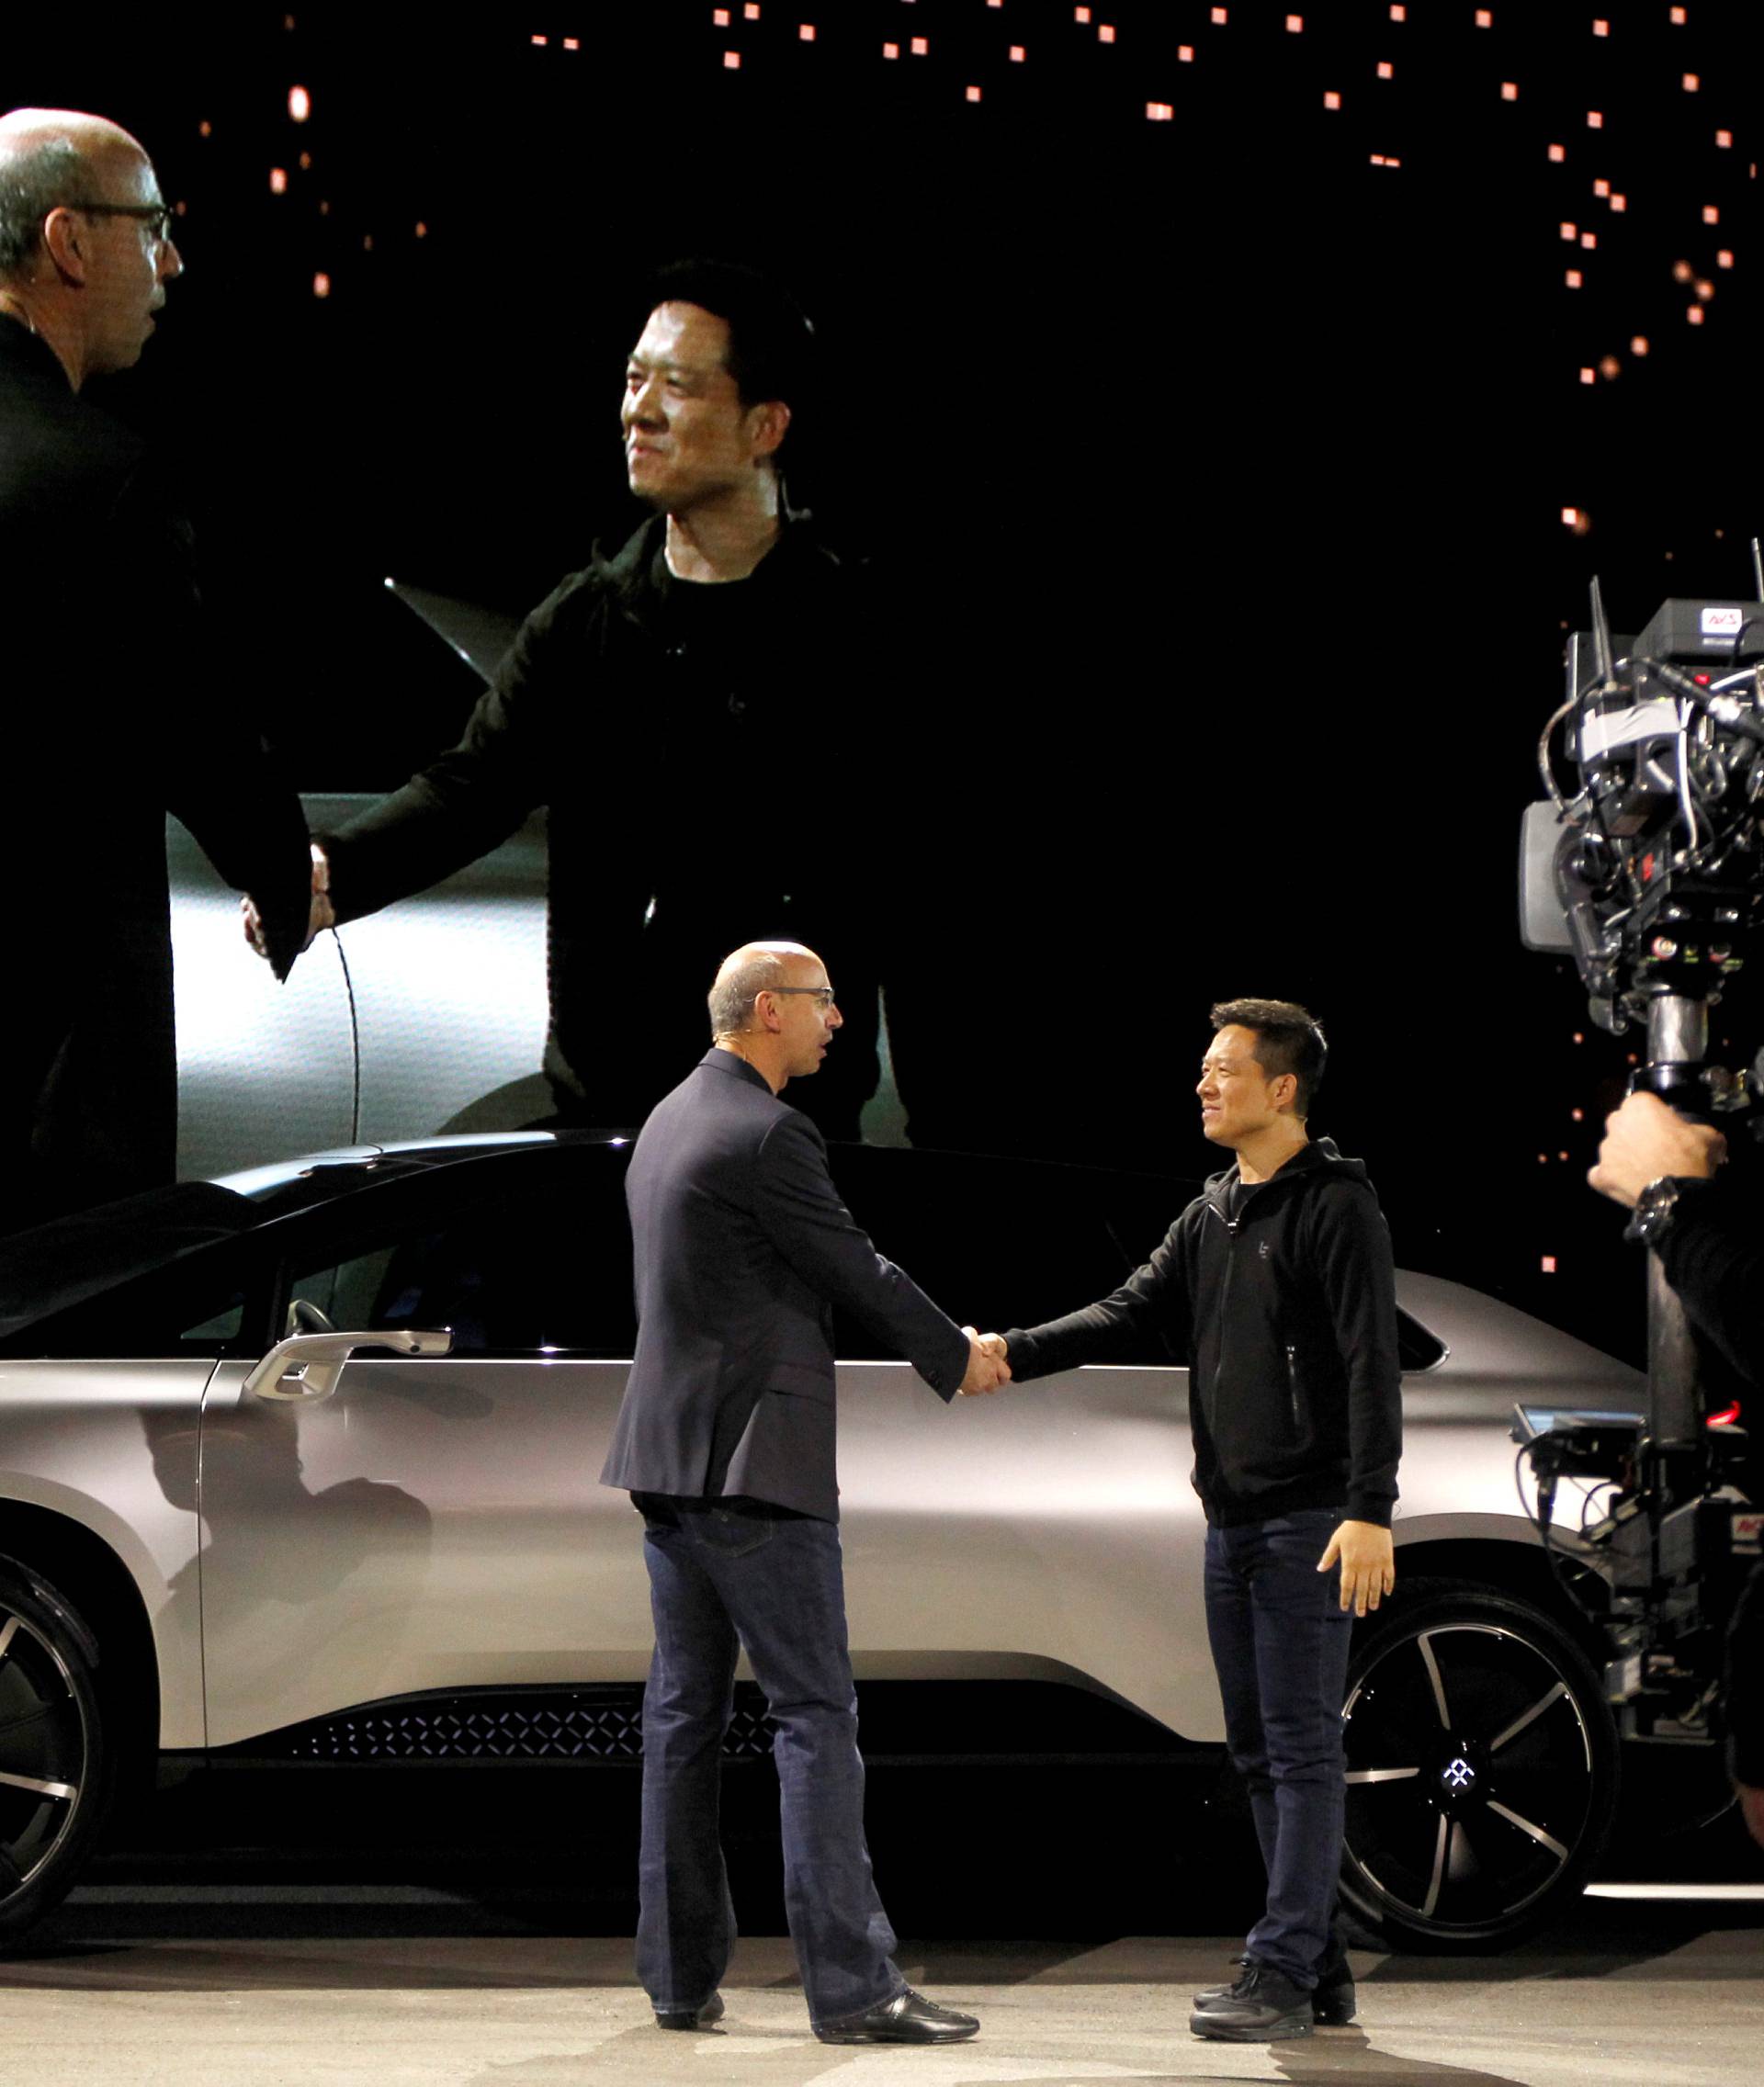 Nick Sampson (L), senior vice president of product R&D and engineering at Faraday Future, shakes hands with YT Jia (L), founder and CEO of LeEco, in front of a Faraday Future FF 91 electric car during an unveiling event in Las Vegas